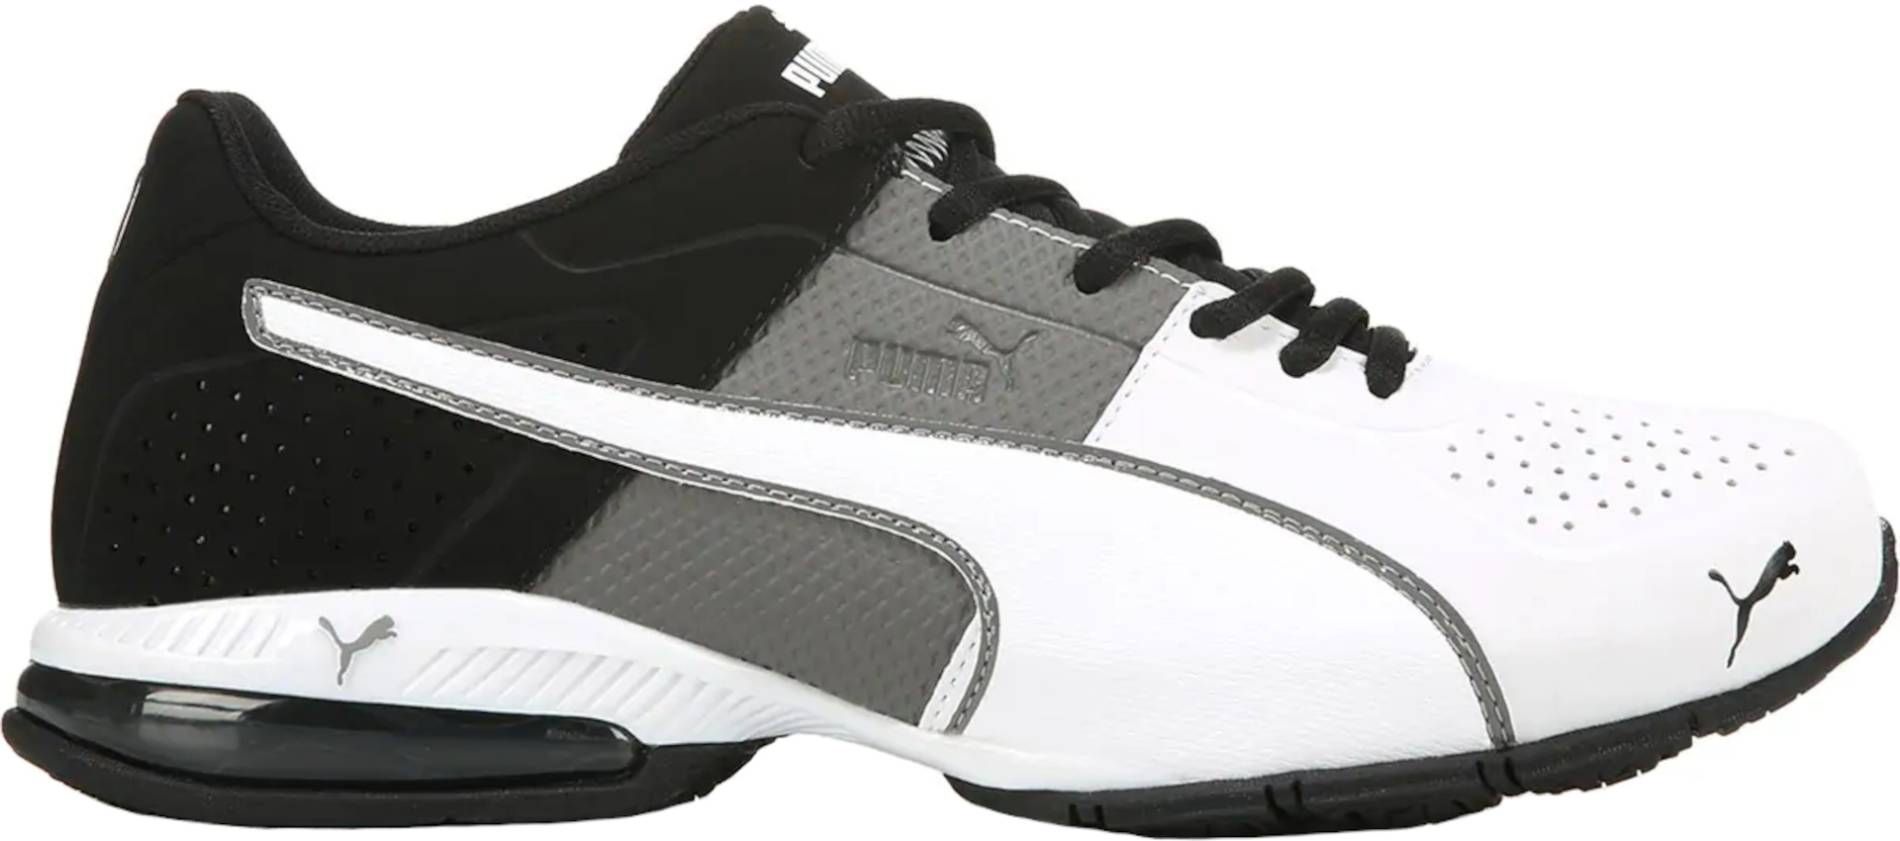 XL Puma Black Silver Sold Out | Infrastructure-intelligenceShops | 9 Reasons to/NOT to Buy Película adidas vs Puma 2016 2022)